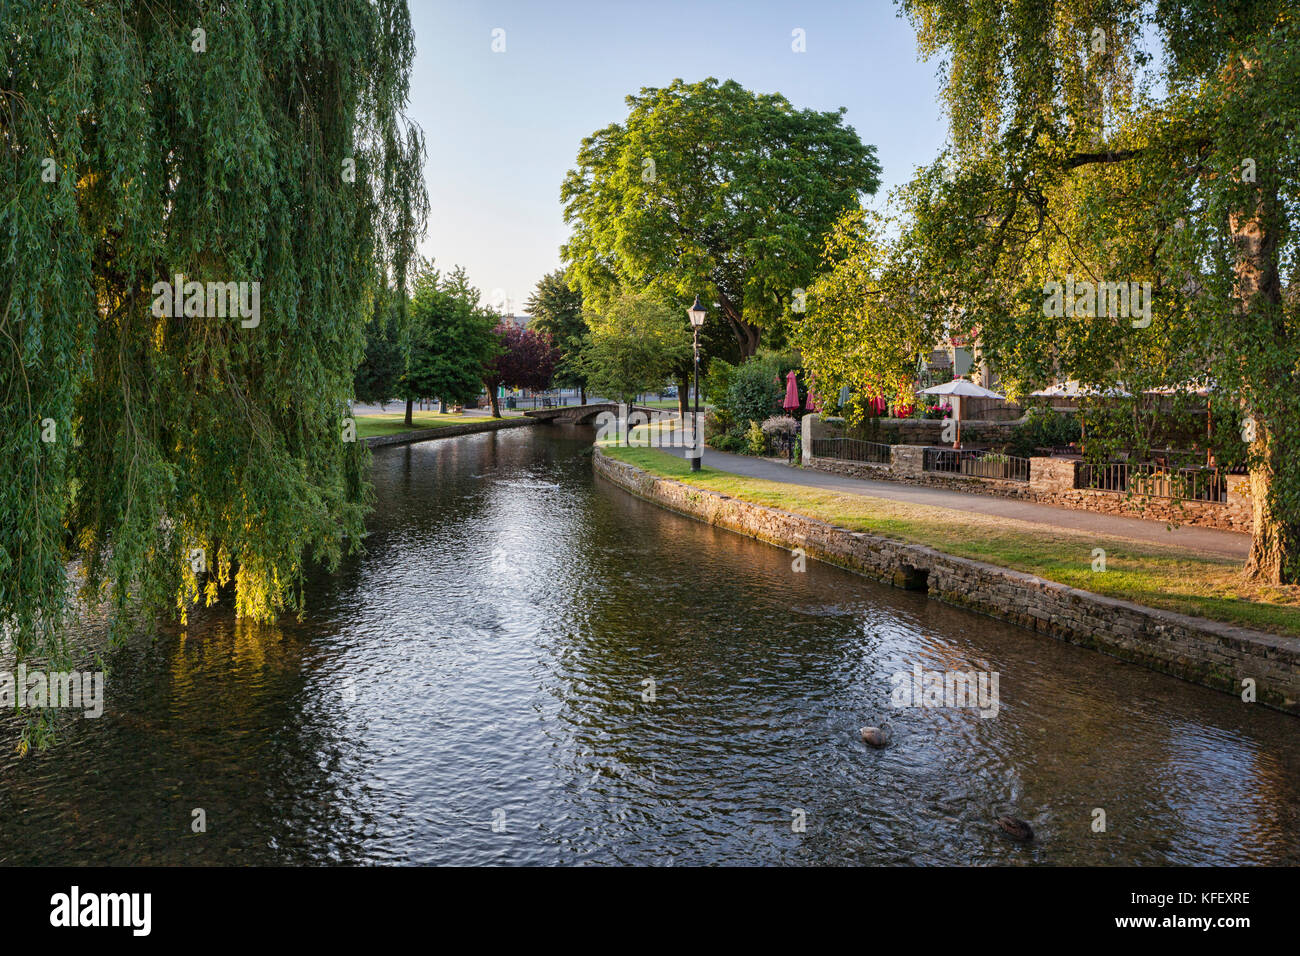 The Cotswold village of Bourton-on-the-Water, Gloucestershire, England Stock Photo